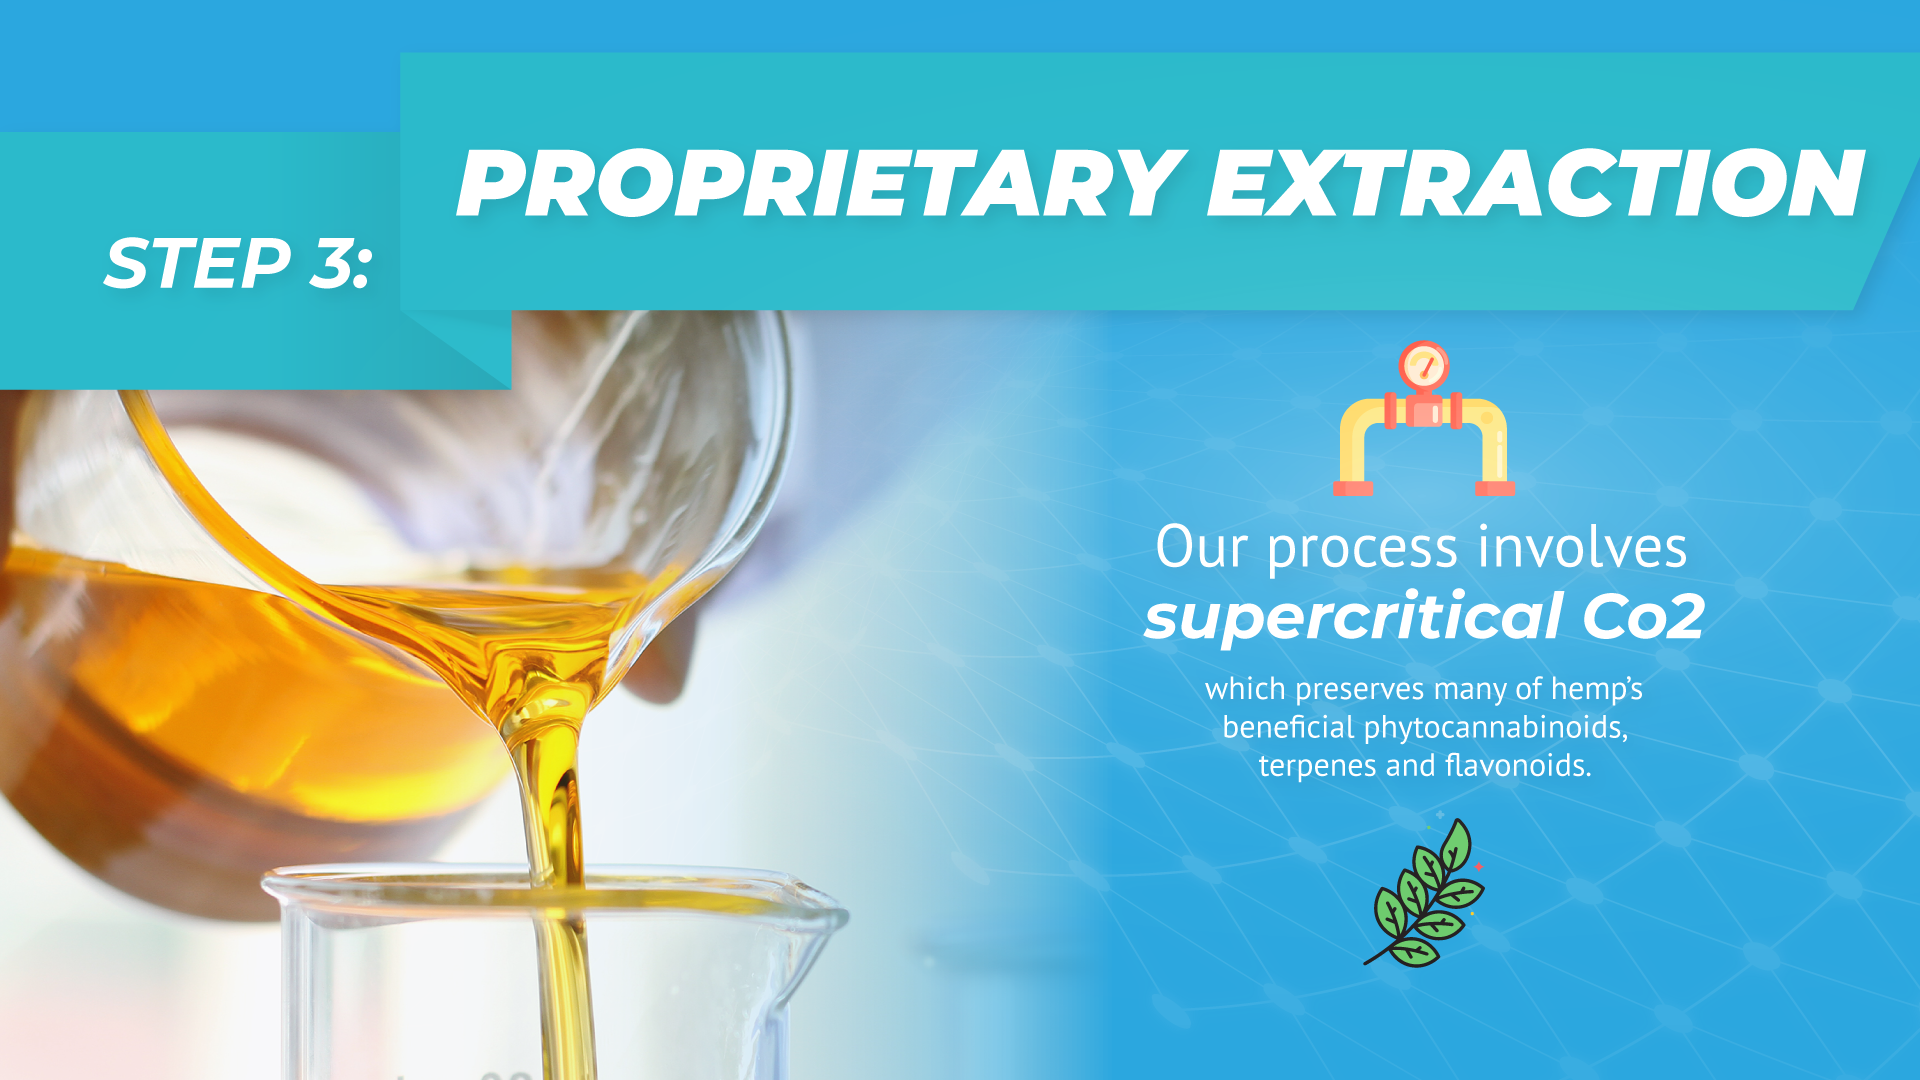 PROPRIETARY EXTRACTION Our process involves supercritical Co2, to preserve many of hemp’s beneficial phytocannabinoids, terpenes and flavonoids. The result? The highest quality broad spectrum hemp oil available. While CBD on its own offers many benefits, a growing body of research has found that a broad-spectrum product leads to multiplying benefits. This is called the entourage effect. Once extracted, undesirable plant solids like waxes are removed from the oil.